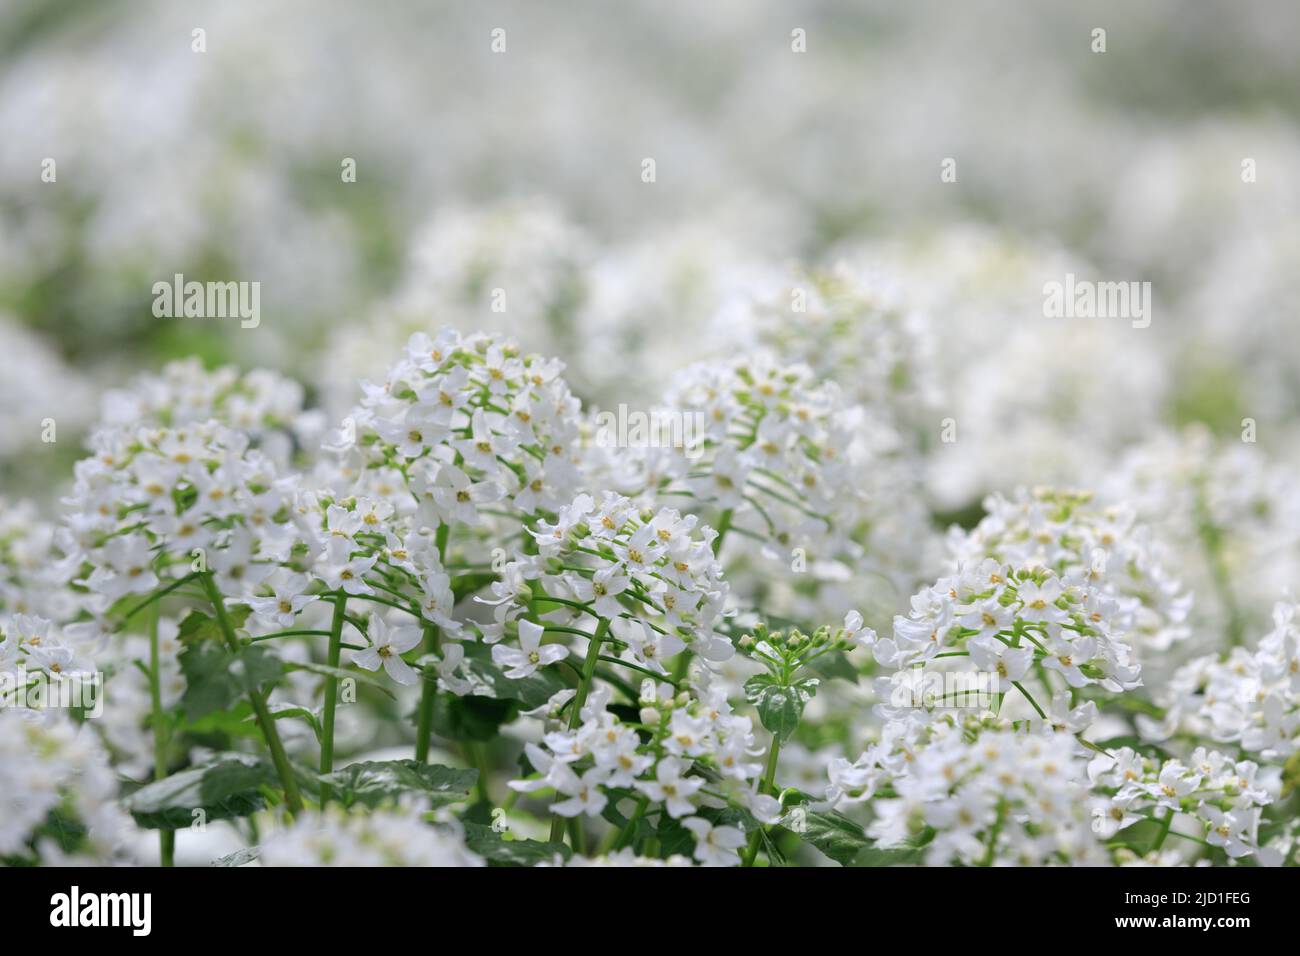 Arabis alpina, mountain rockcress or alpine rock cress. White arabis caucasica flowers growing in the forest. Floral background. Gardening Stock Photo